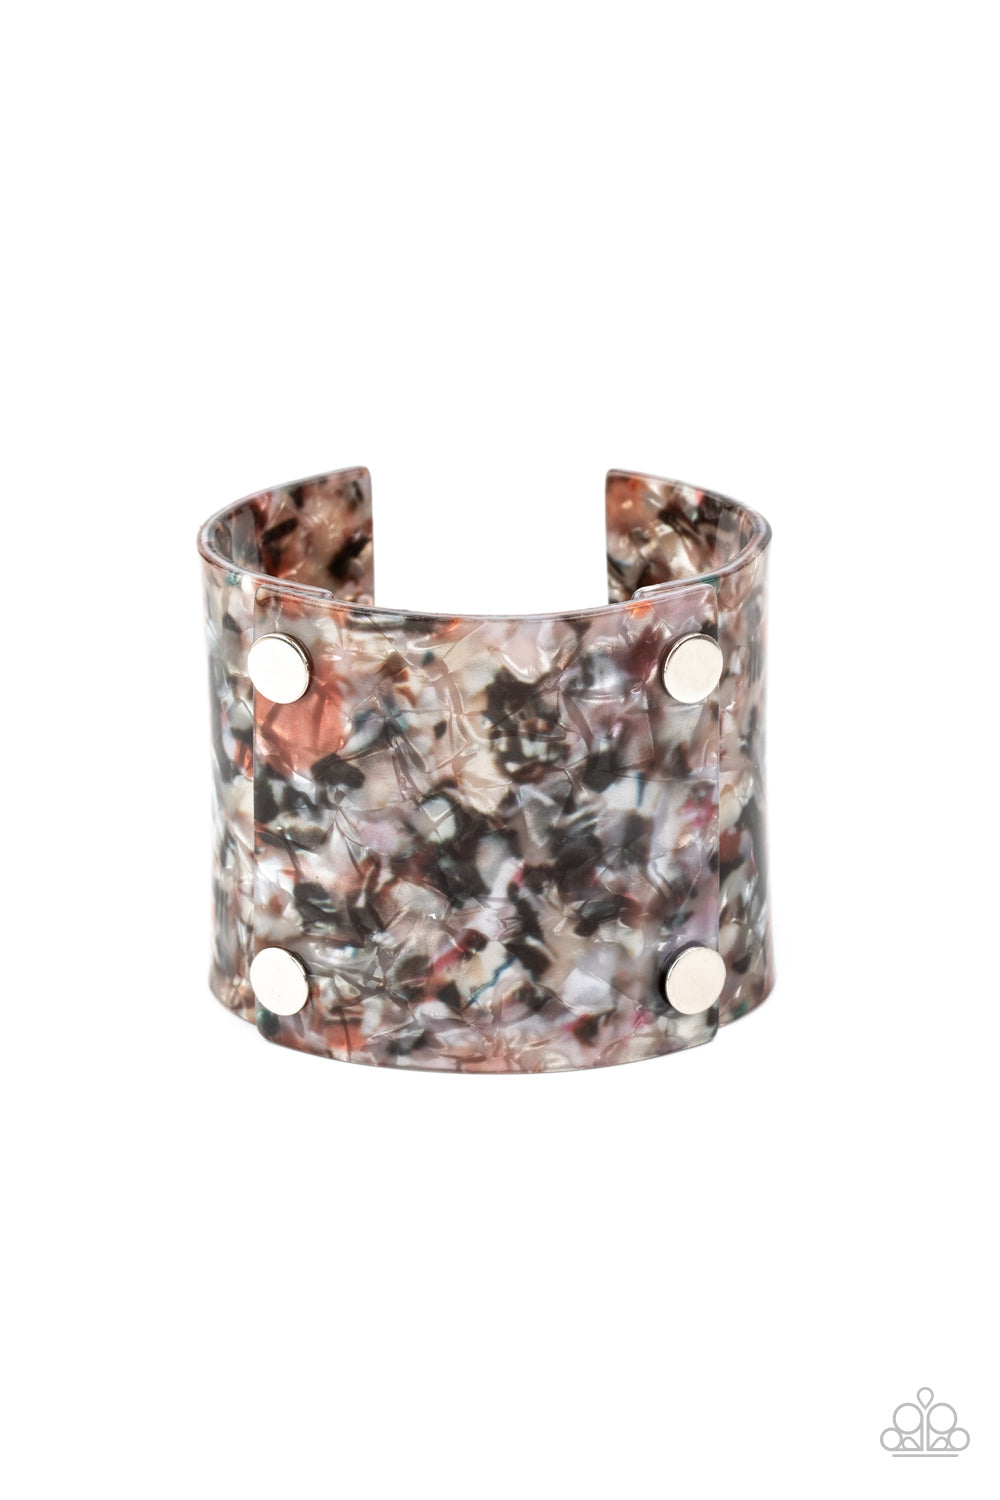 &lt;P&gt; Featuring a shell-like finish, pieces of iridescent acrylic frames are bolted in place into a stylish cuff around the wrist. &lt;/P&gt;

&lt;P&gt;&lt;I&gt; Sold as one individual bracelet.&lt;/I&gt;&lt;/p&gt;


&lt;img src=\&quot;https://d9b54x484lq62.cloudfront.net/paparazzi/shopping/images/517_tag150x115_1.png\&quot; alt=\&quot;New Kit\&quot; align=\&quot;middle\&quot; height=\&quot;50\&quot; width=\&quot;50\&quot;/&gt;